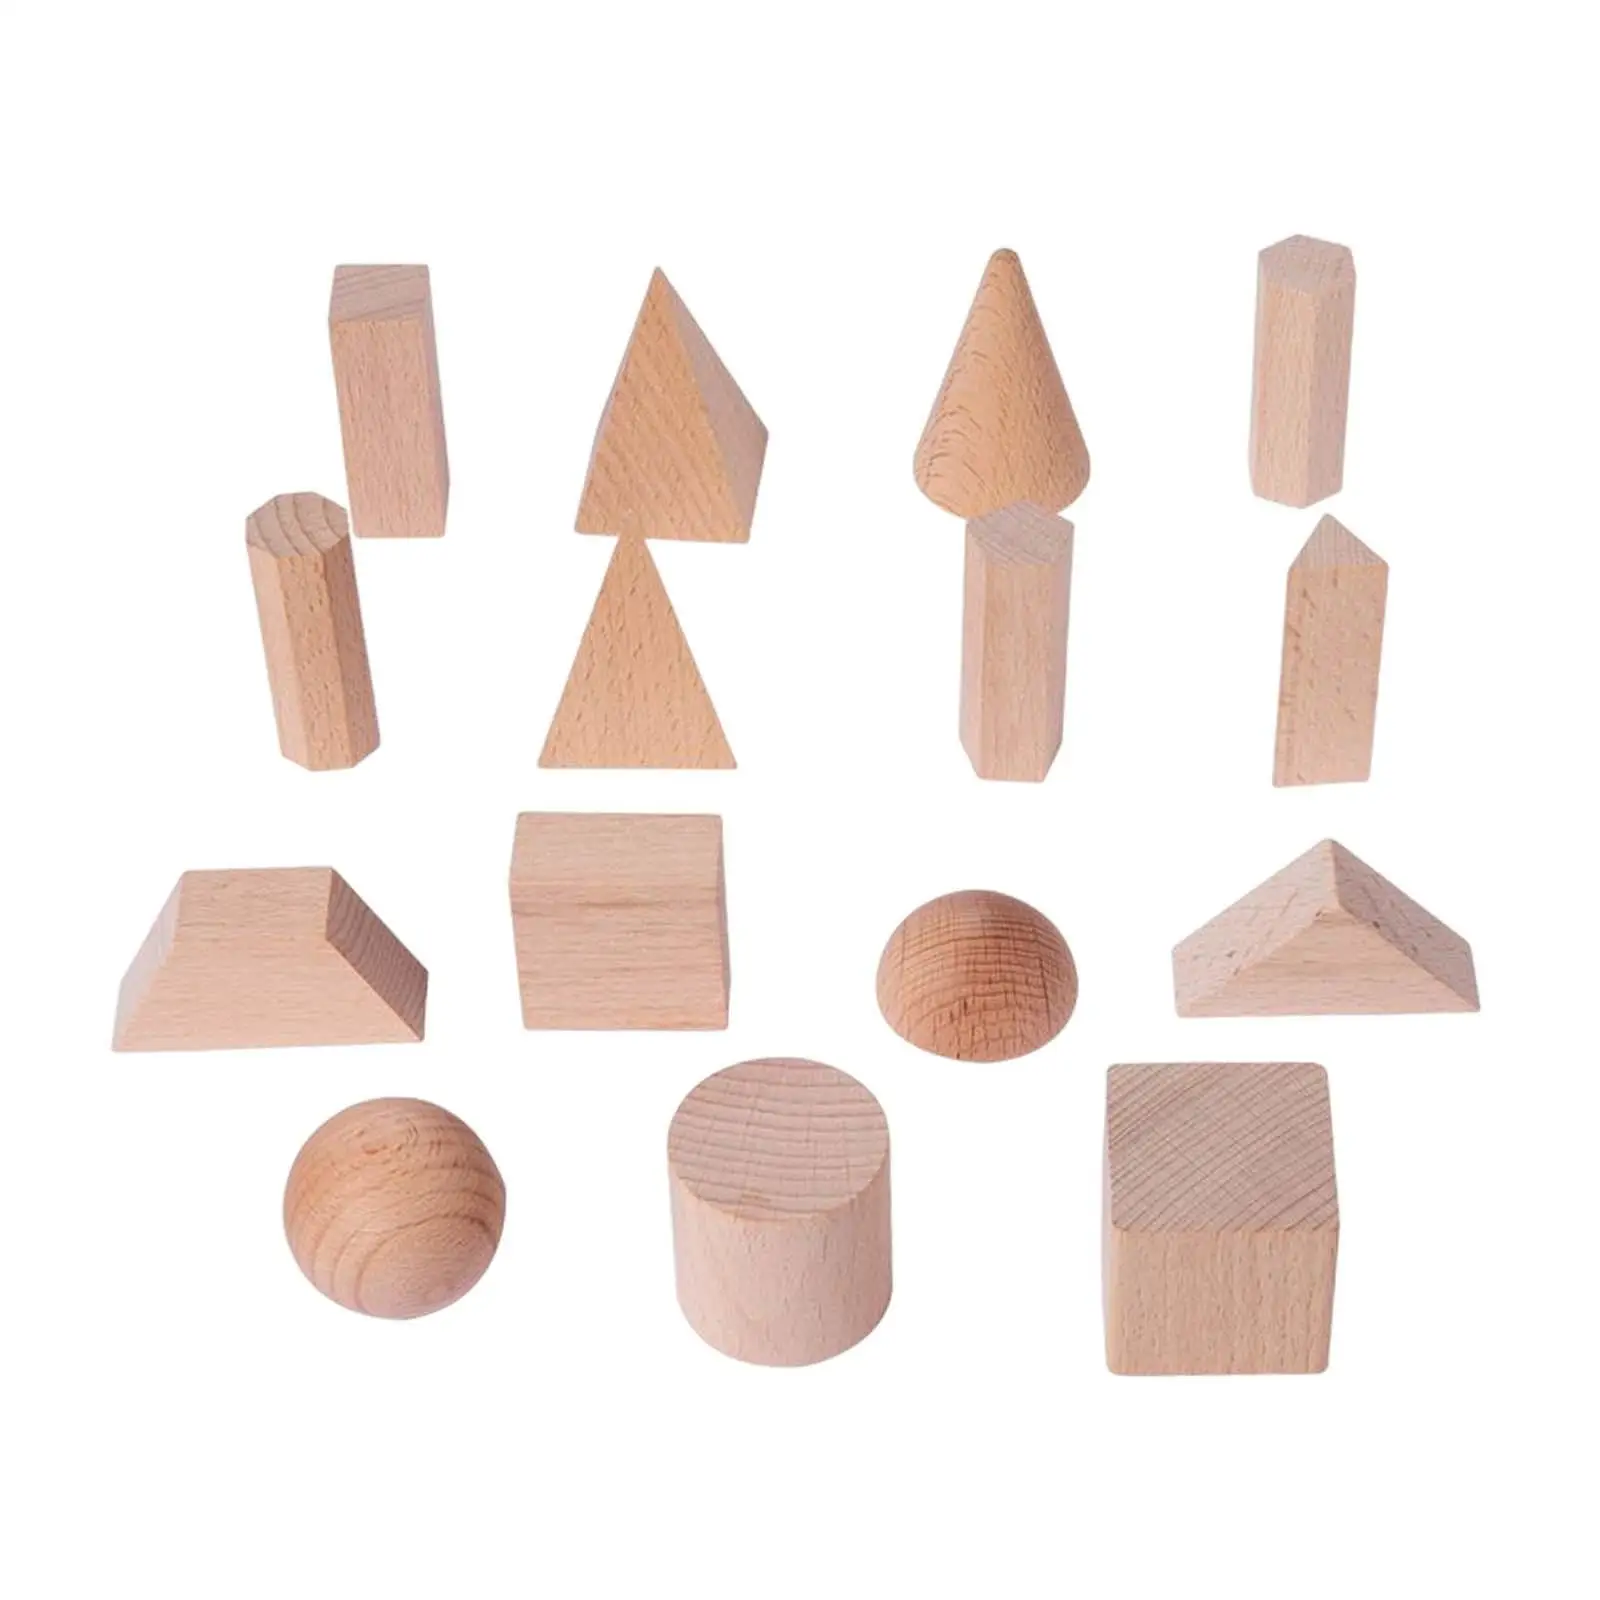 15 Pieces Wooden Geometric Solid Blocks,Educational Montessori Toys,3D Shapes Stacking Toy for Kids Ages 2+